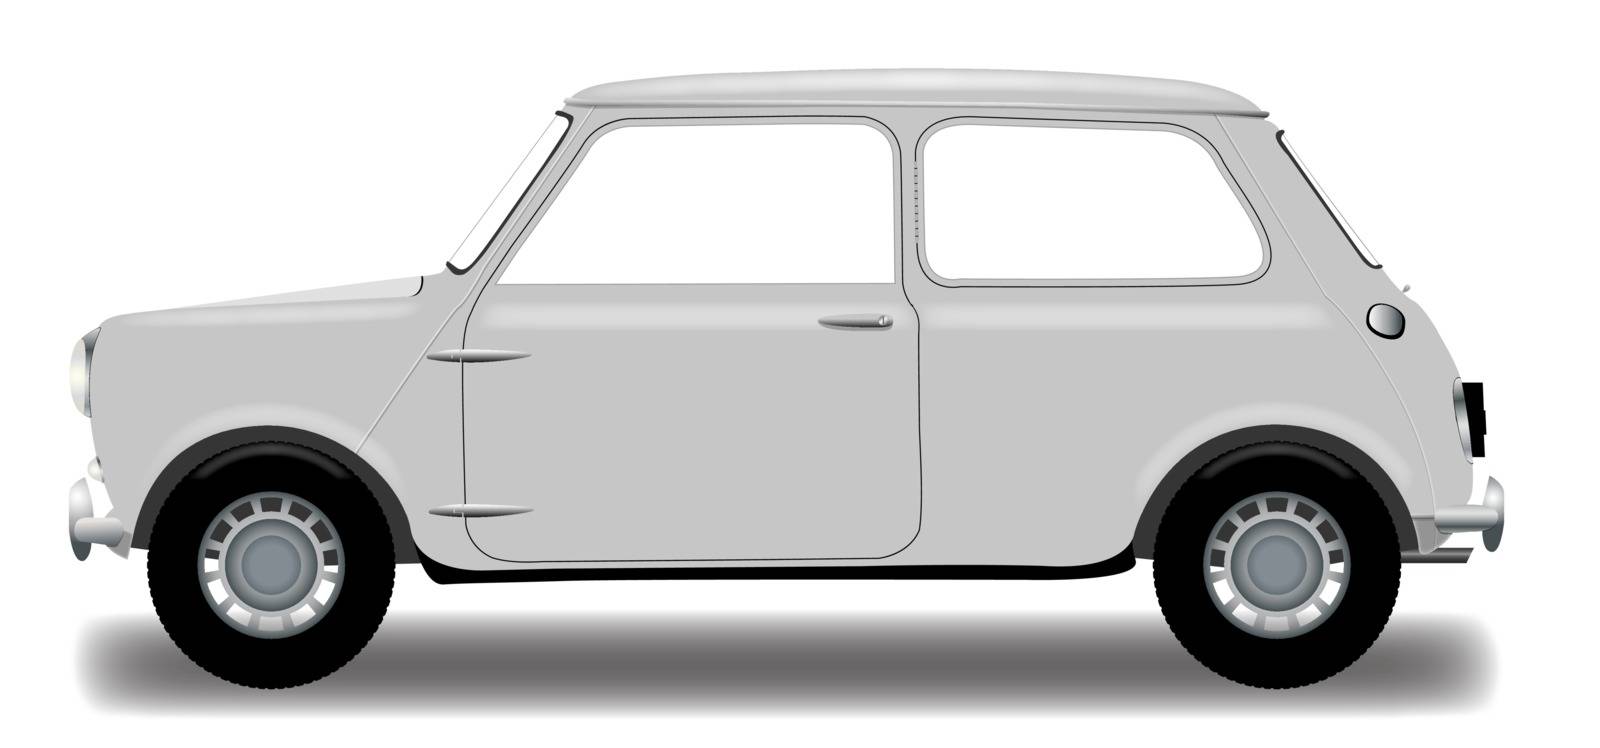 A detailed small car isolated on a white background